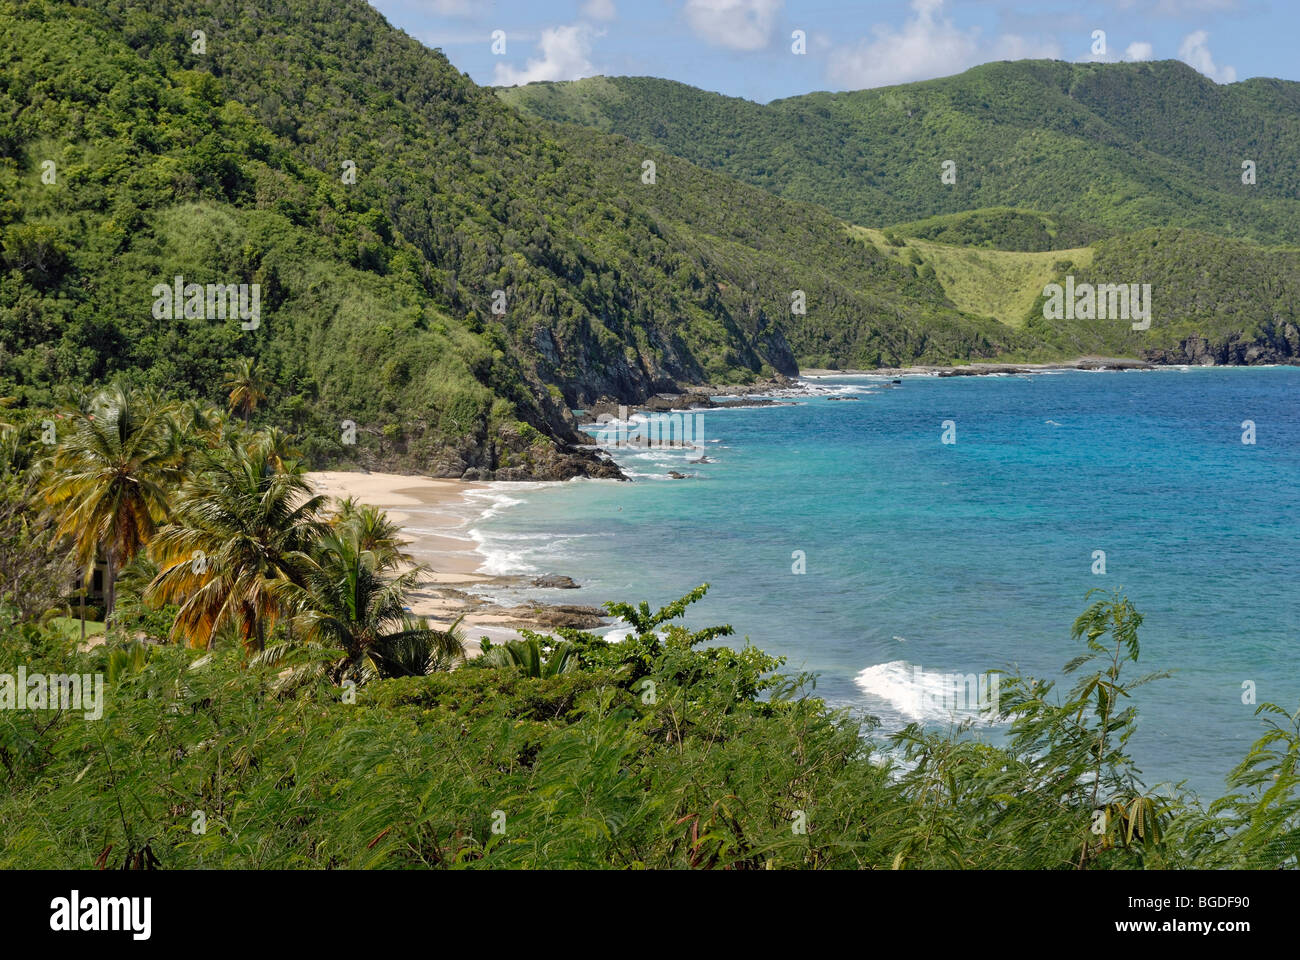 Carambola Beach on the slopes of the tropical rain forest, north-west coast, St. Croix island, U.S. Virgin Islands, United Stat Stock Photo